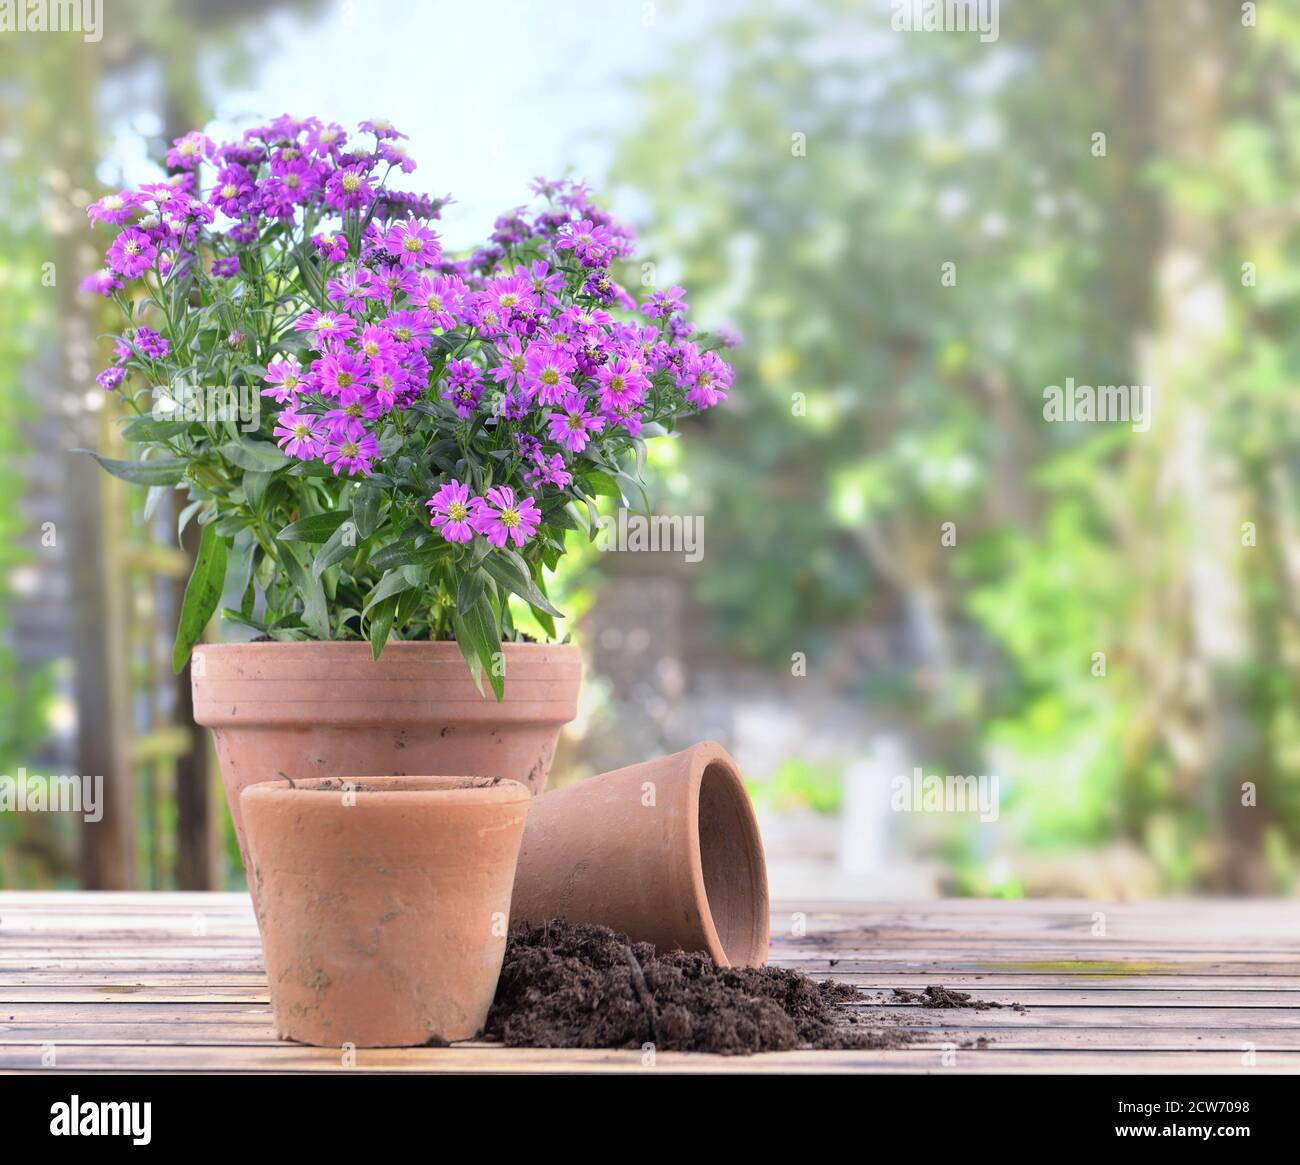 aster flowers blomming in a flower pot on a table in garden Stock Photo